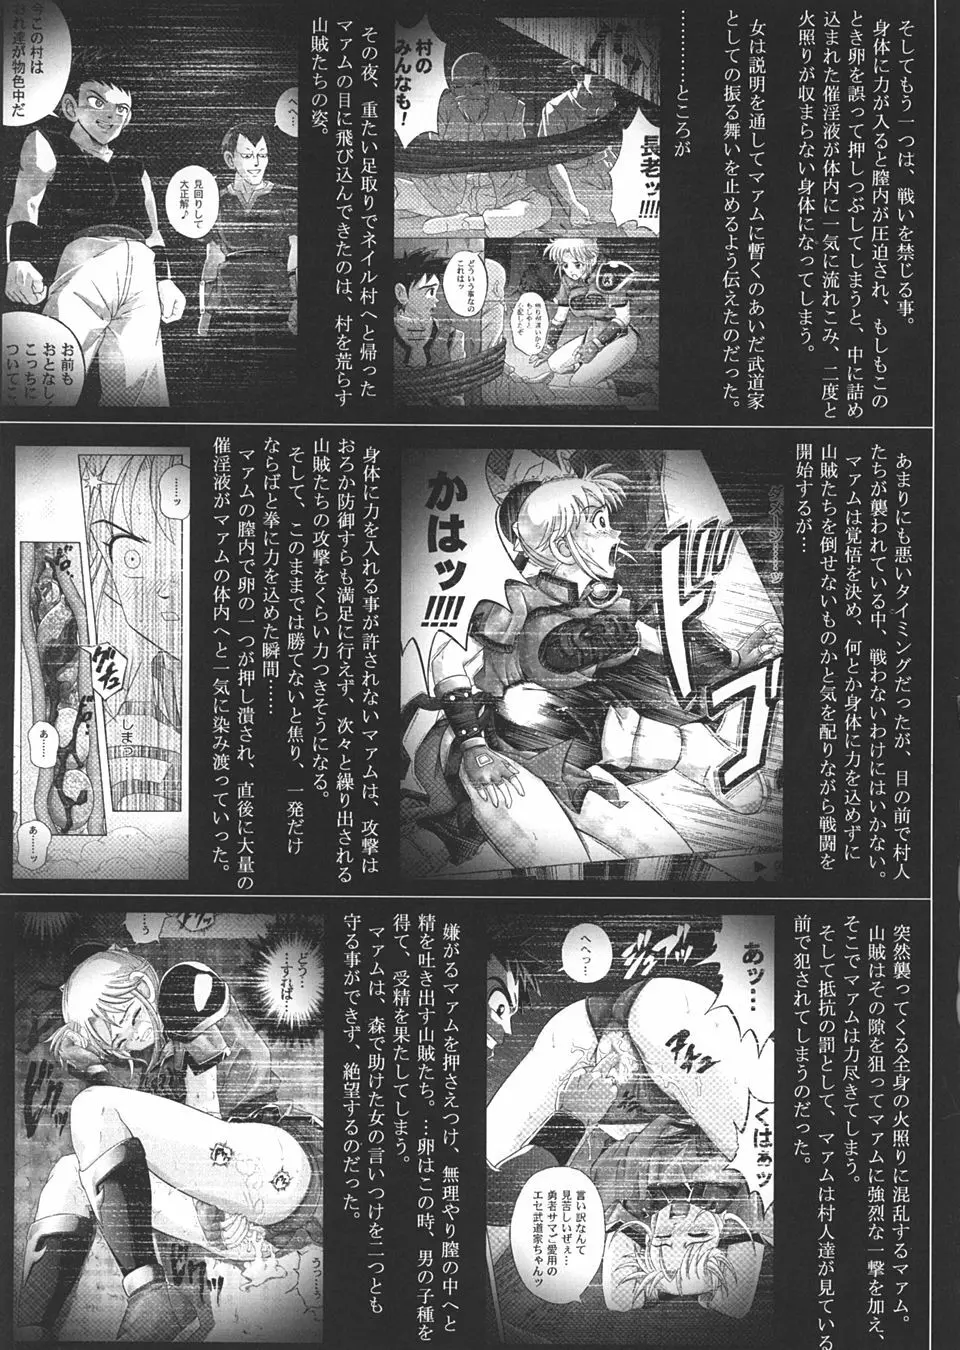 Sinclair 2 & Extra -シンクレア2- Page.6